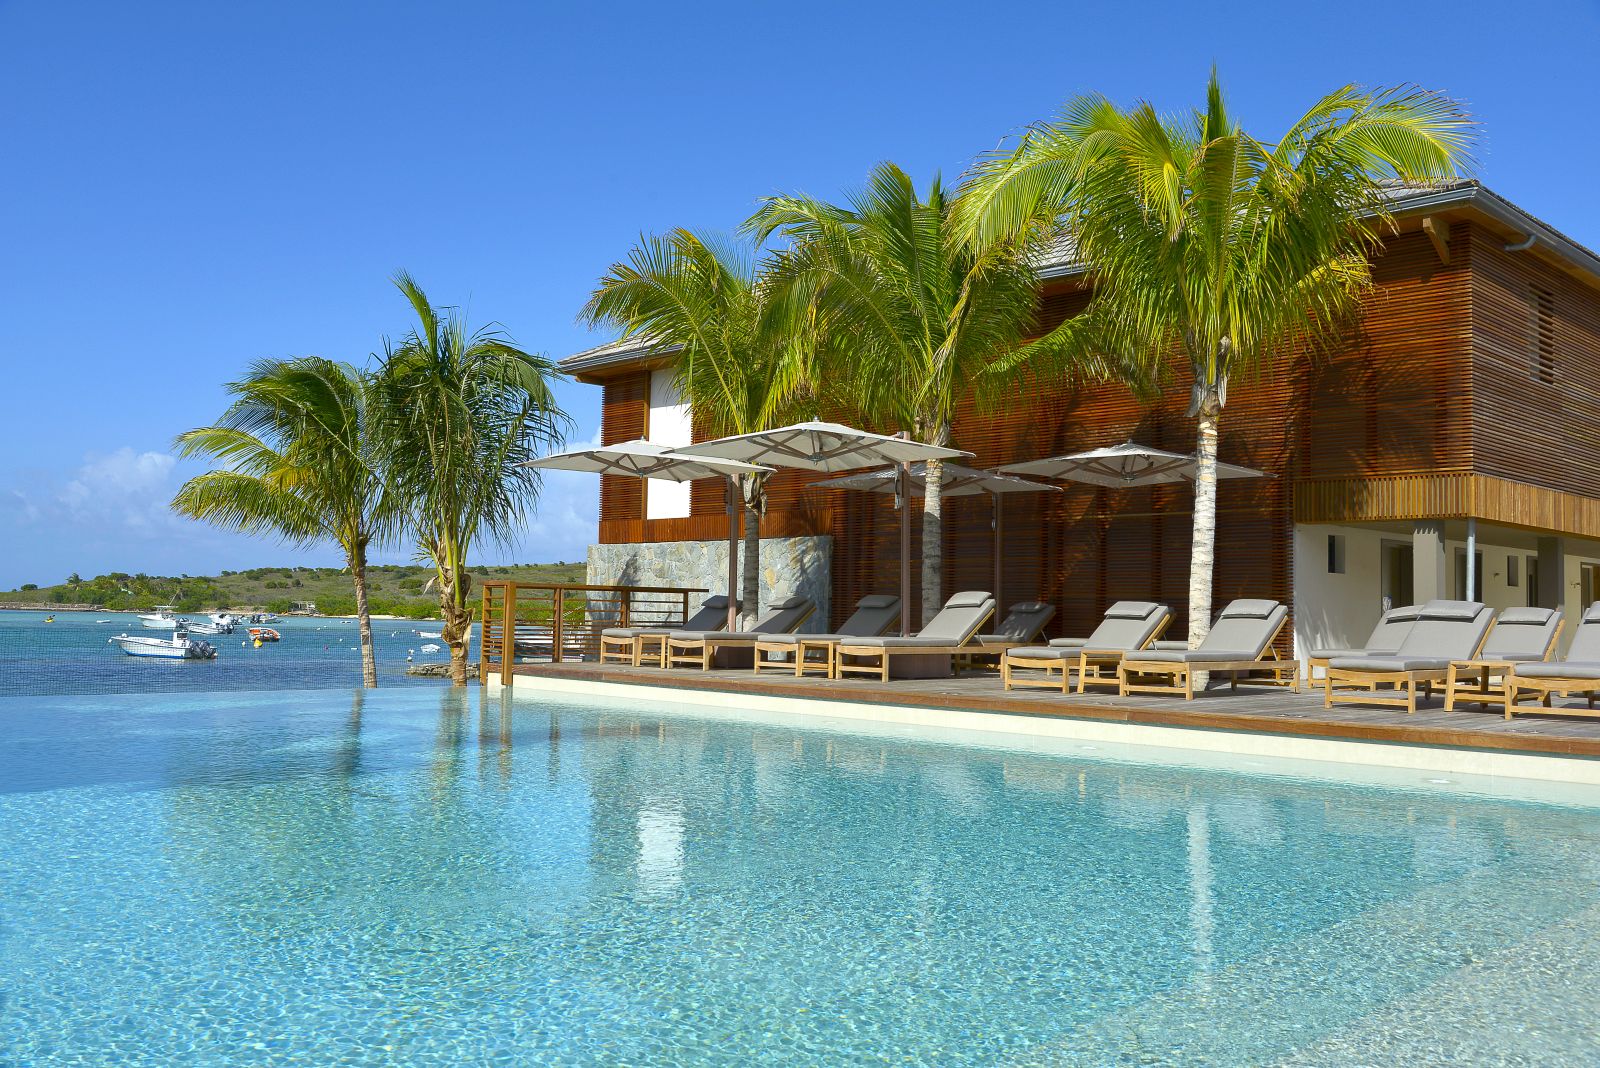 The simming pool at Le Barthelemy Hotel & Spa in St Barths